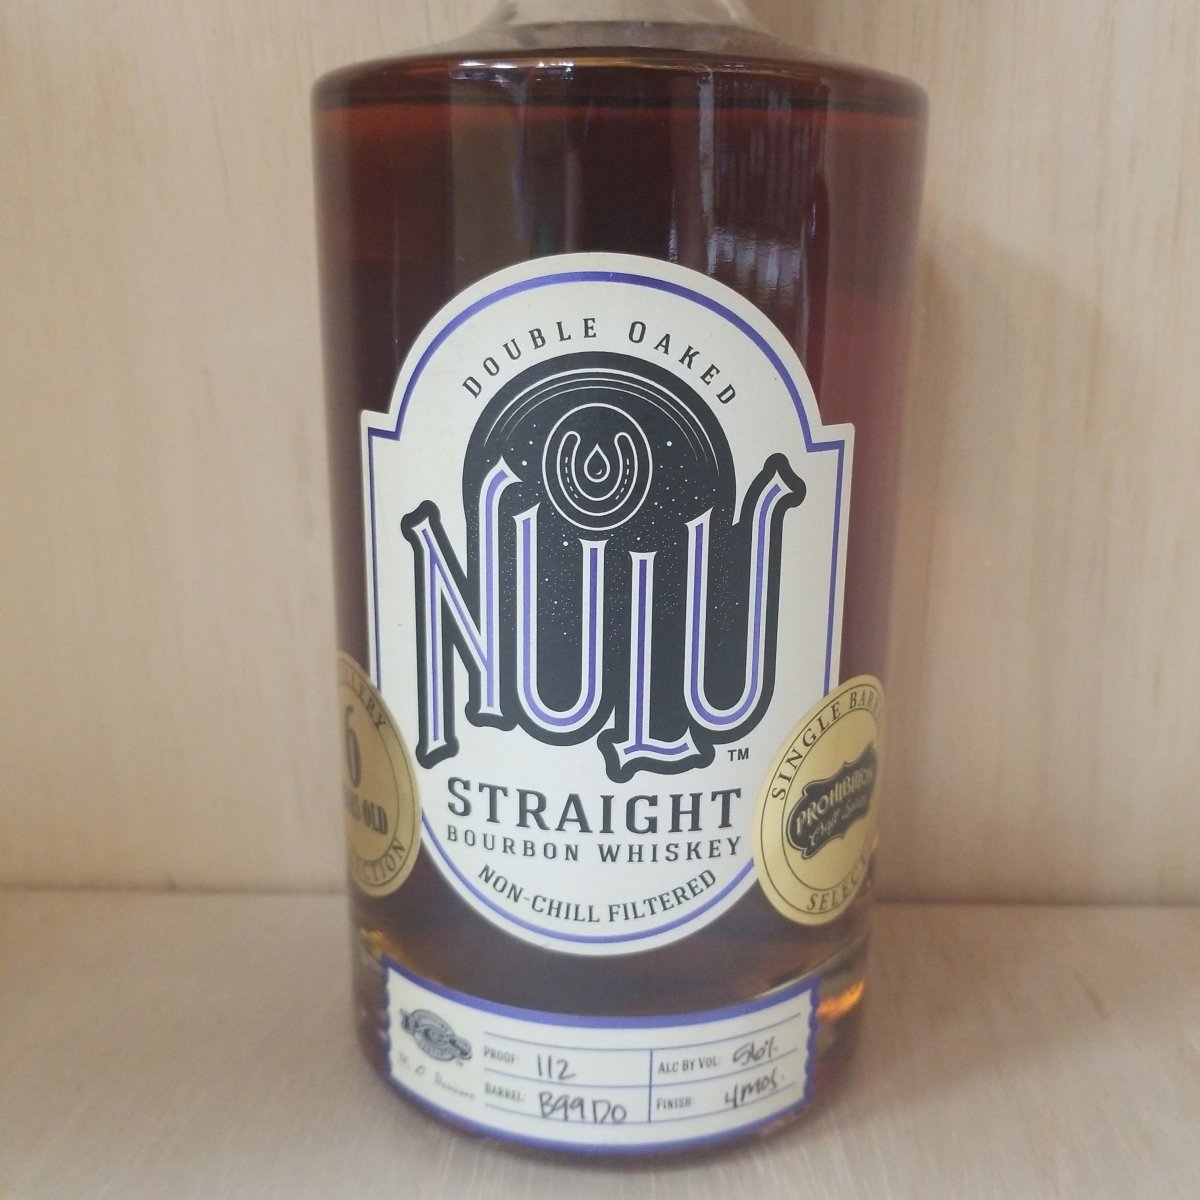 Nulo Double Oaked Straight Bourbon 750ml (Barrel B99DO, proof 112) - Sip & Say